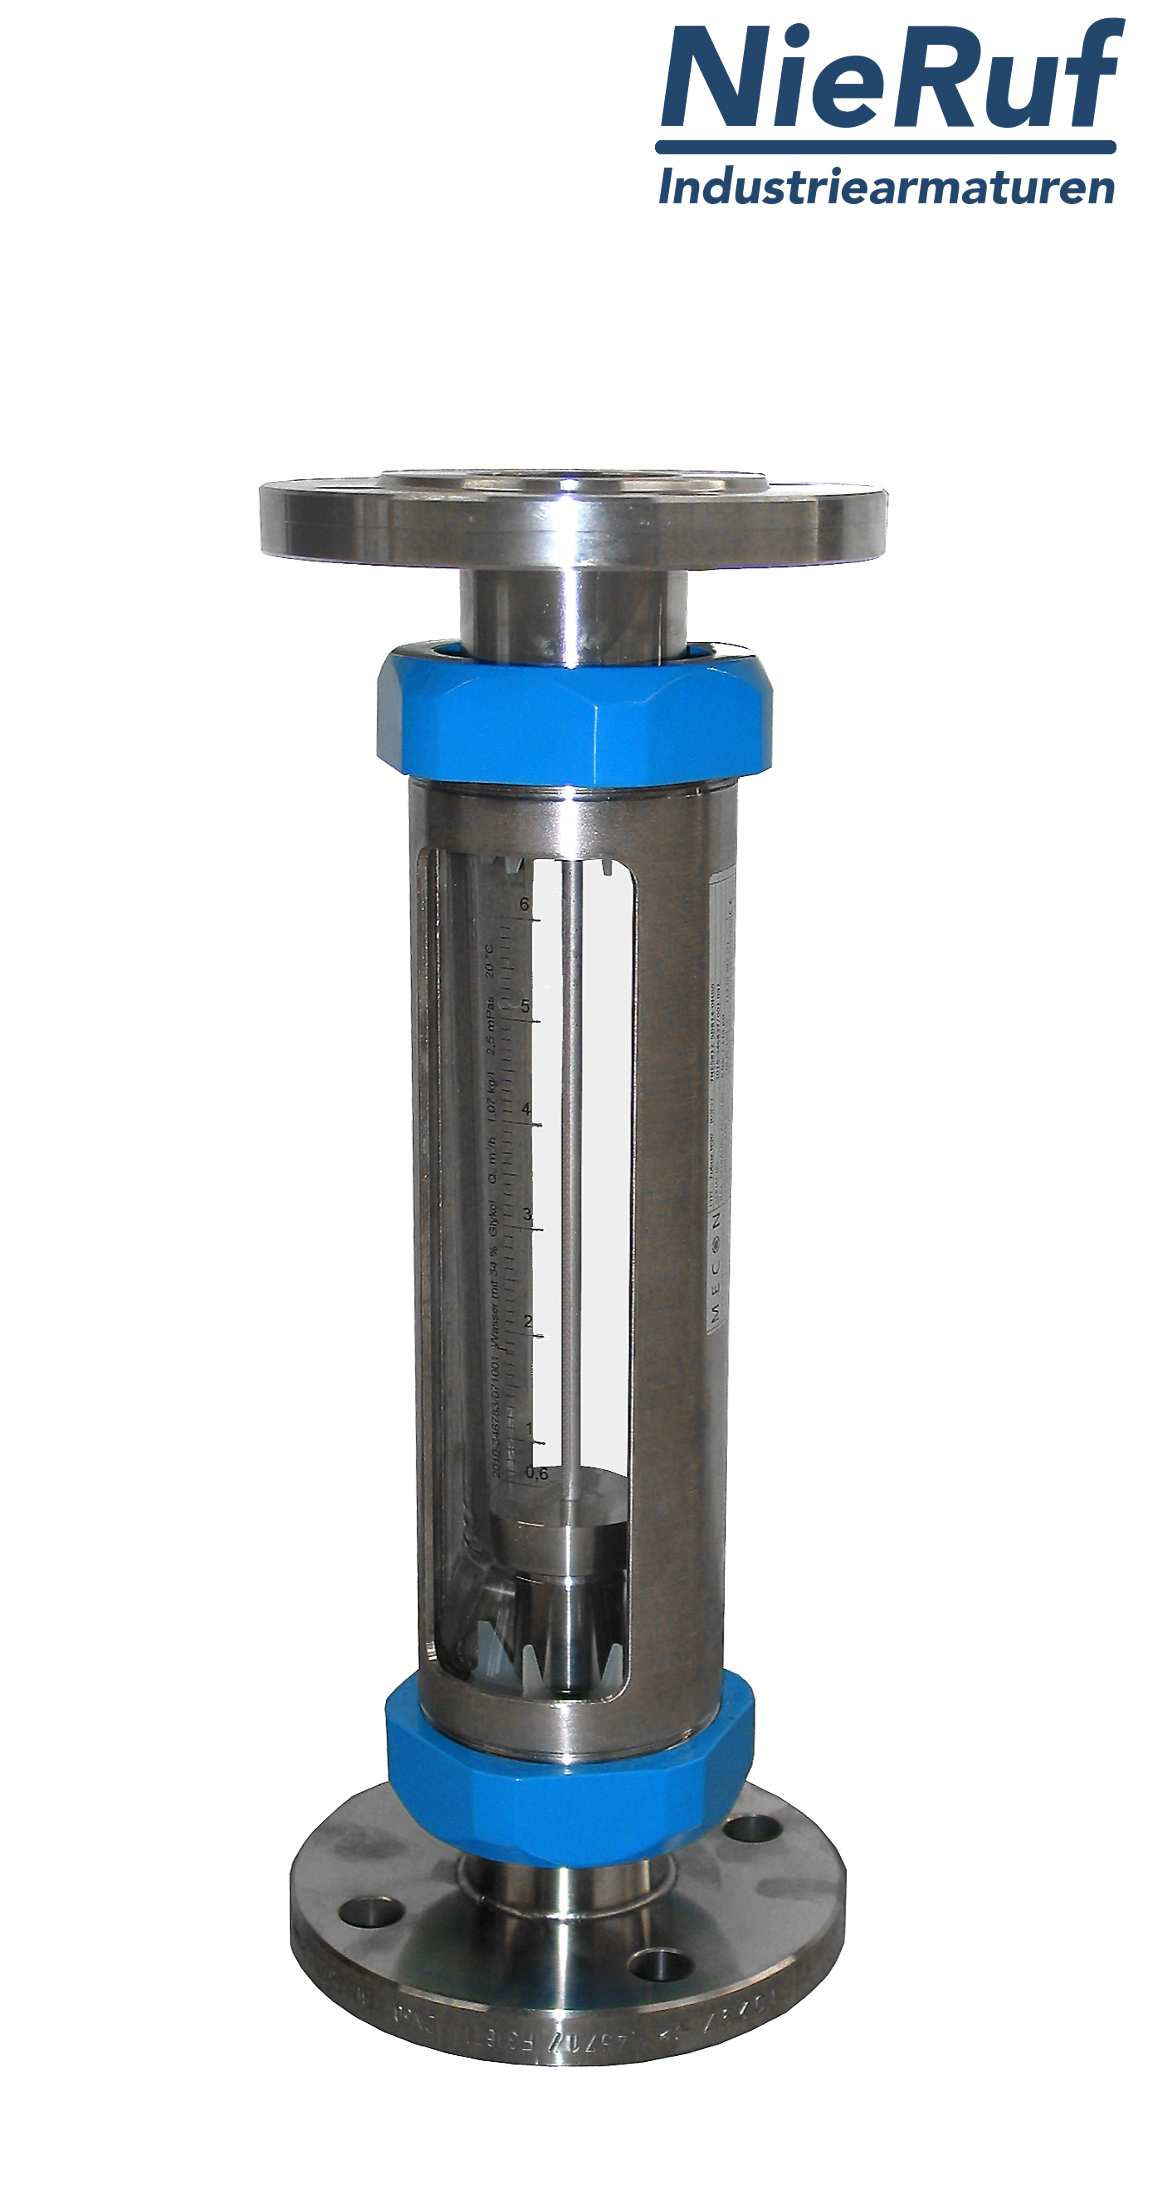 Variable area flowmeter stainless steel + borosilicate flange DN25 16.0 - 160 l/h water FKM